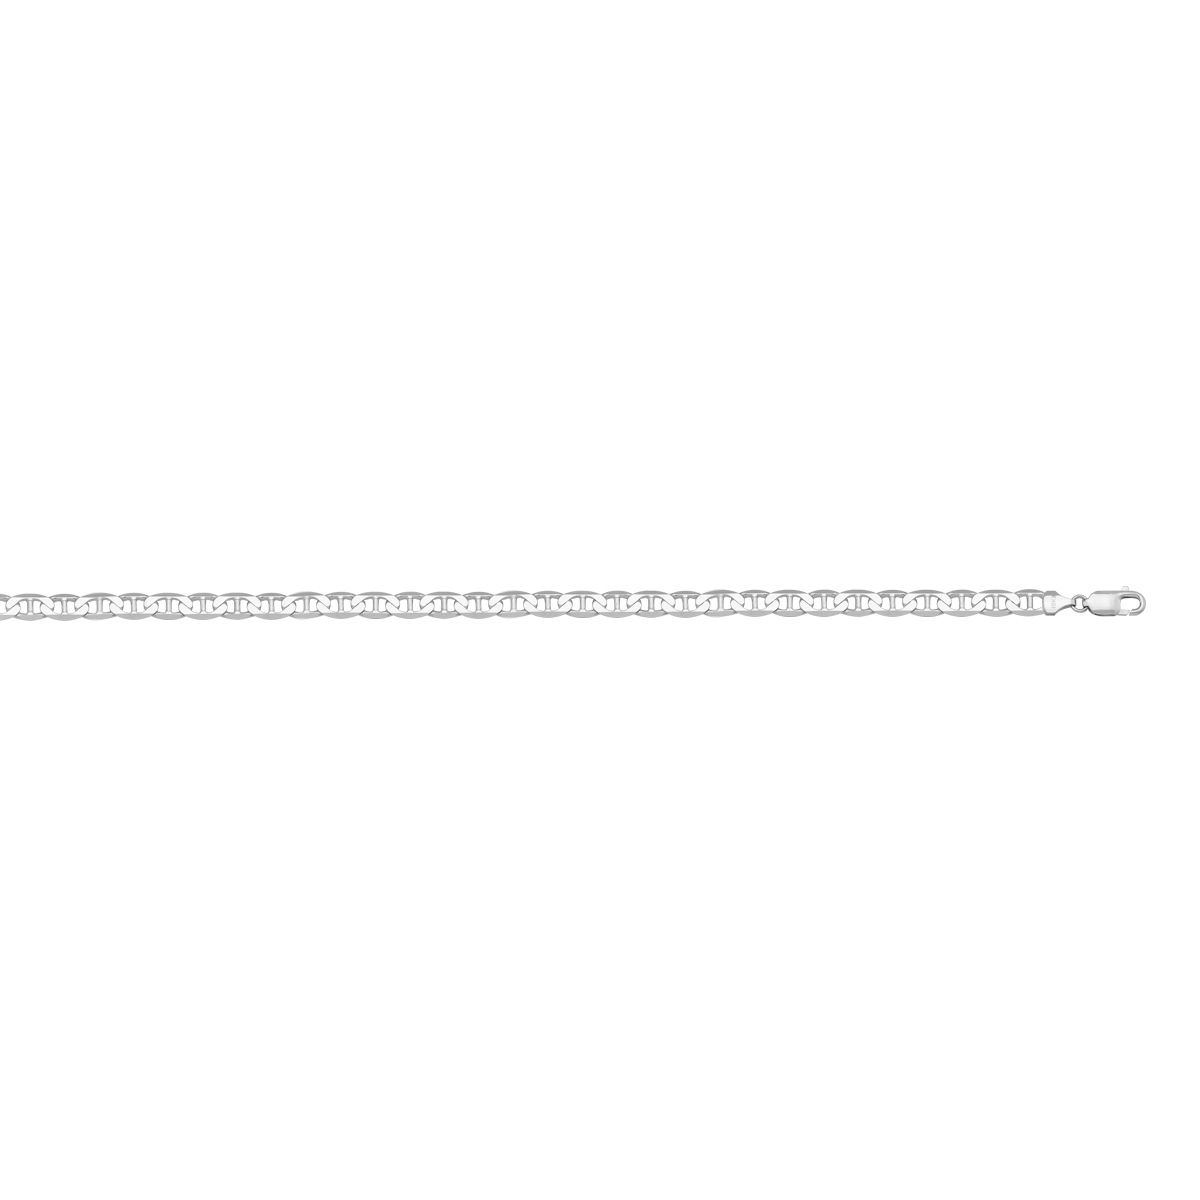 CANC04, Gold Chain, Flat Anchor, White Gold, 2.0 to 3.6 mm